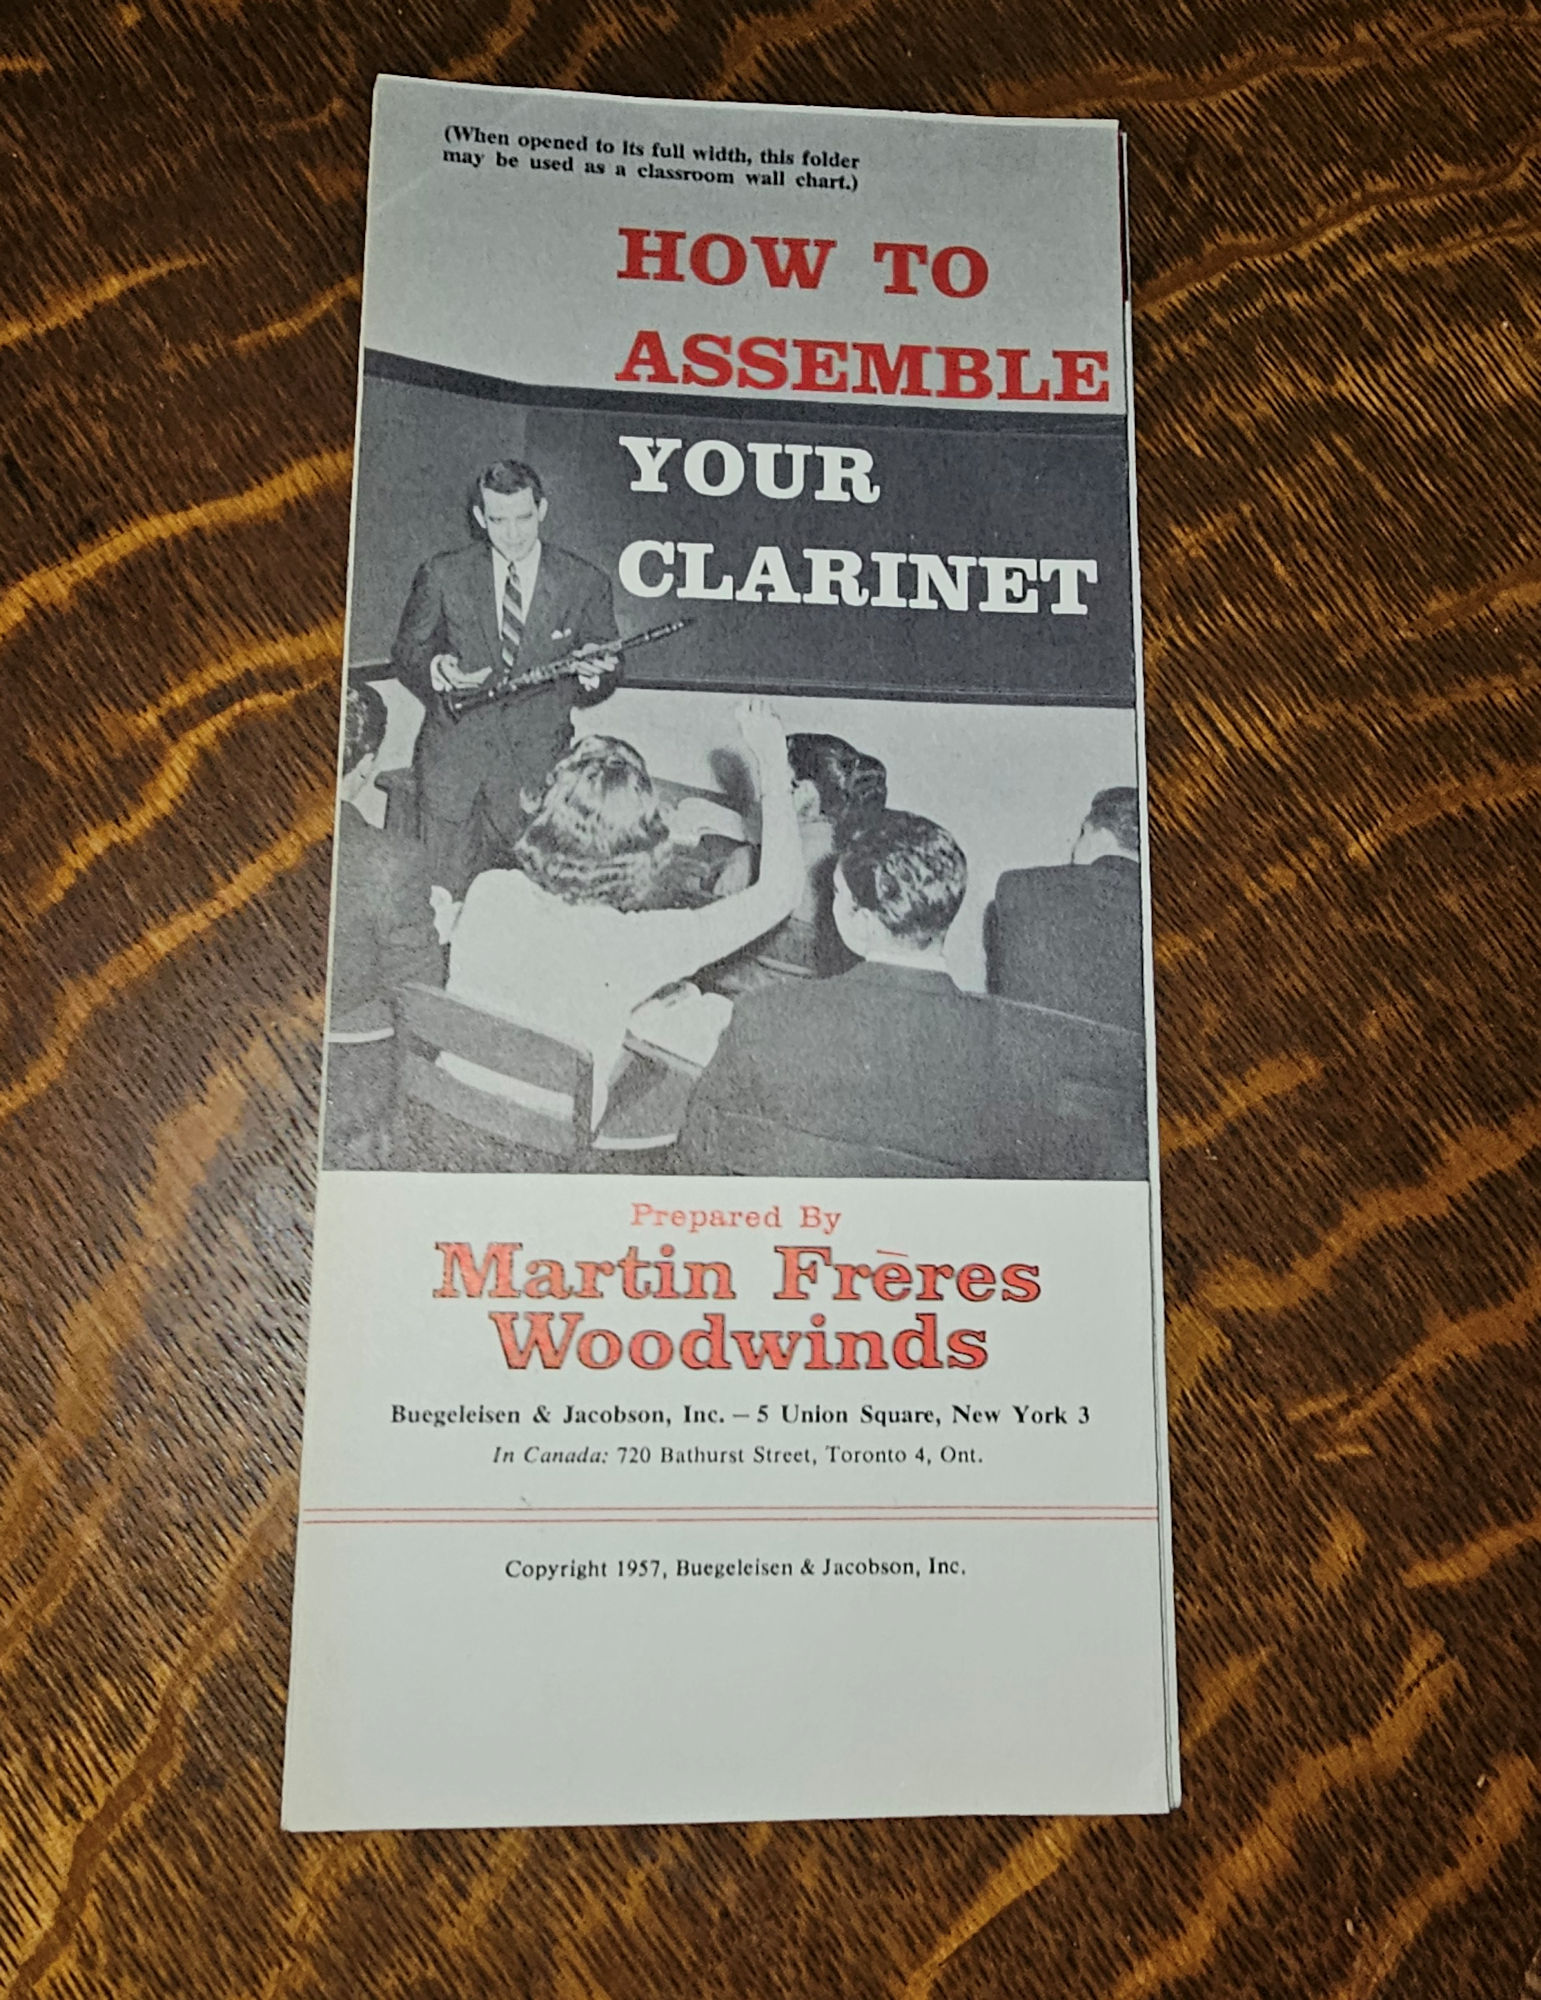 1957 How To Assemble Your Clarinet; Martin
                        Freres Woodwinds